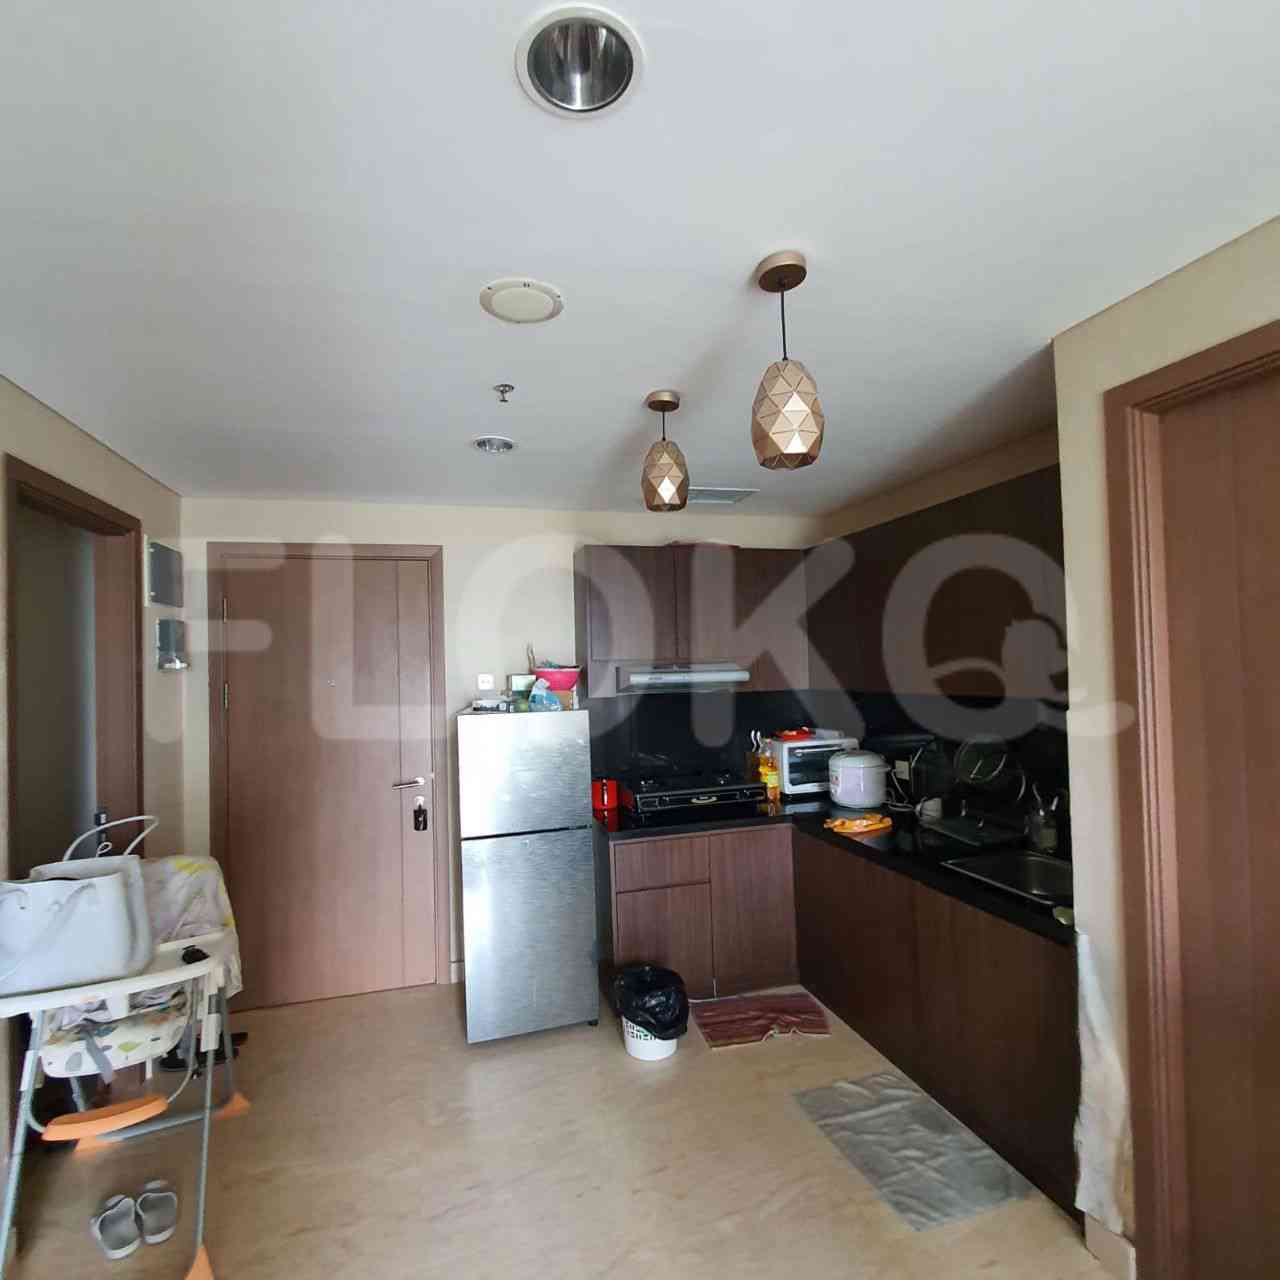 2 Bedroom on 10th Floor for Rent in Puri Orchard Apartment - fce8b7 4